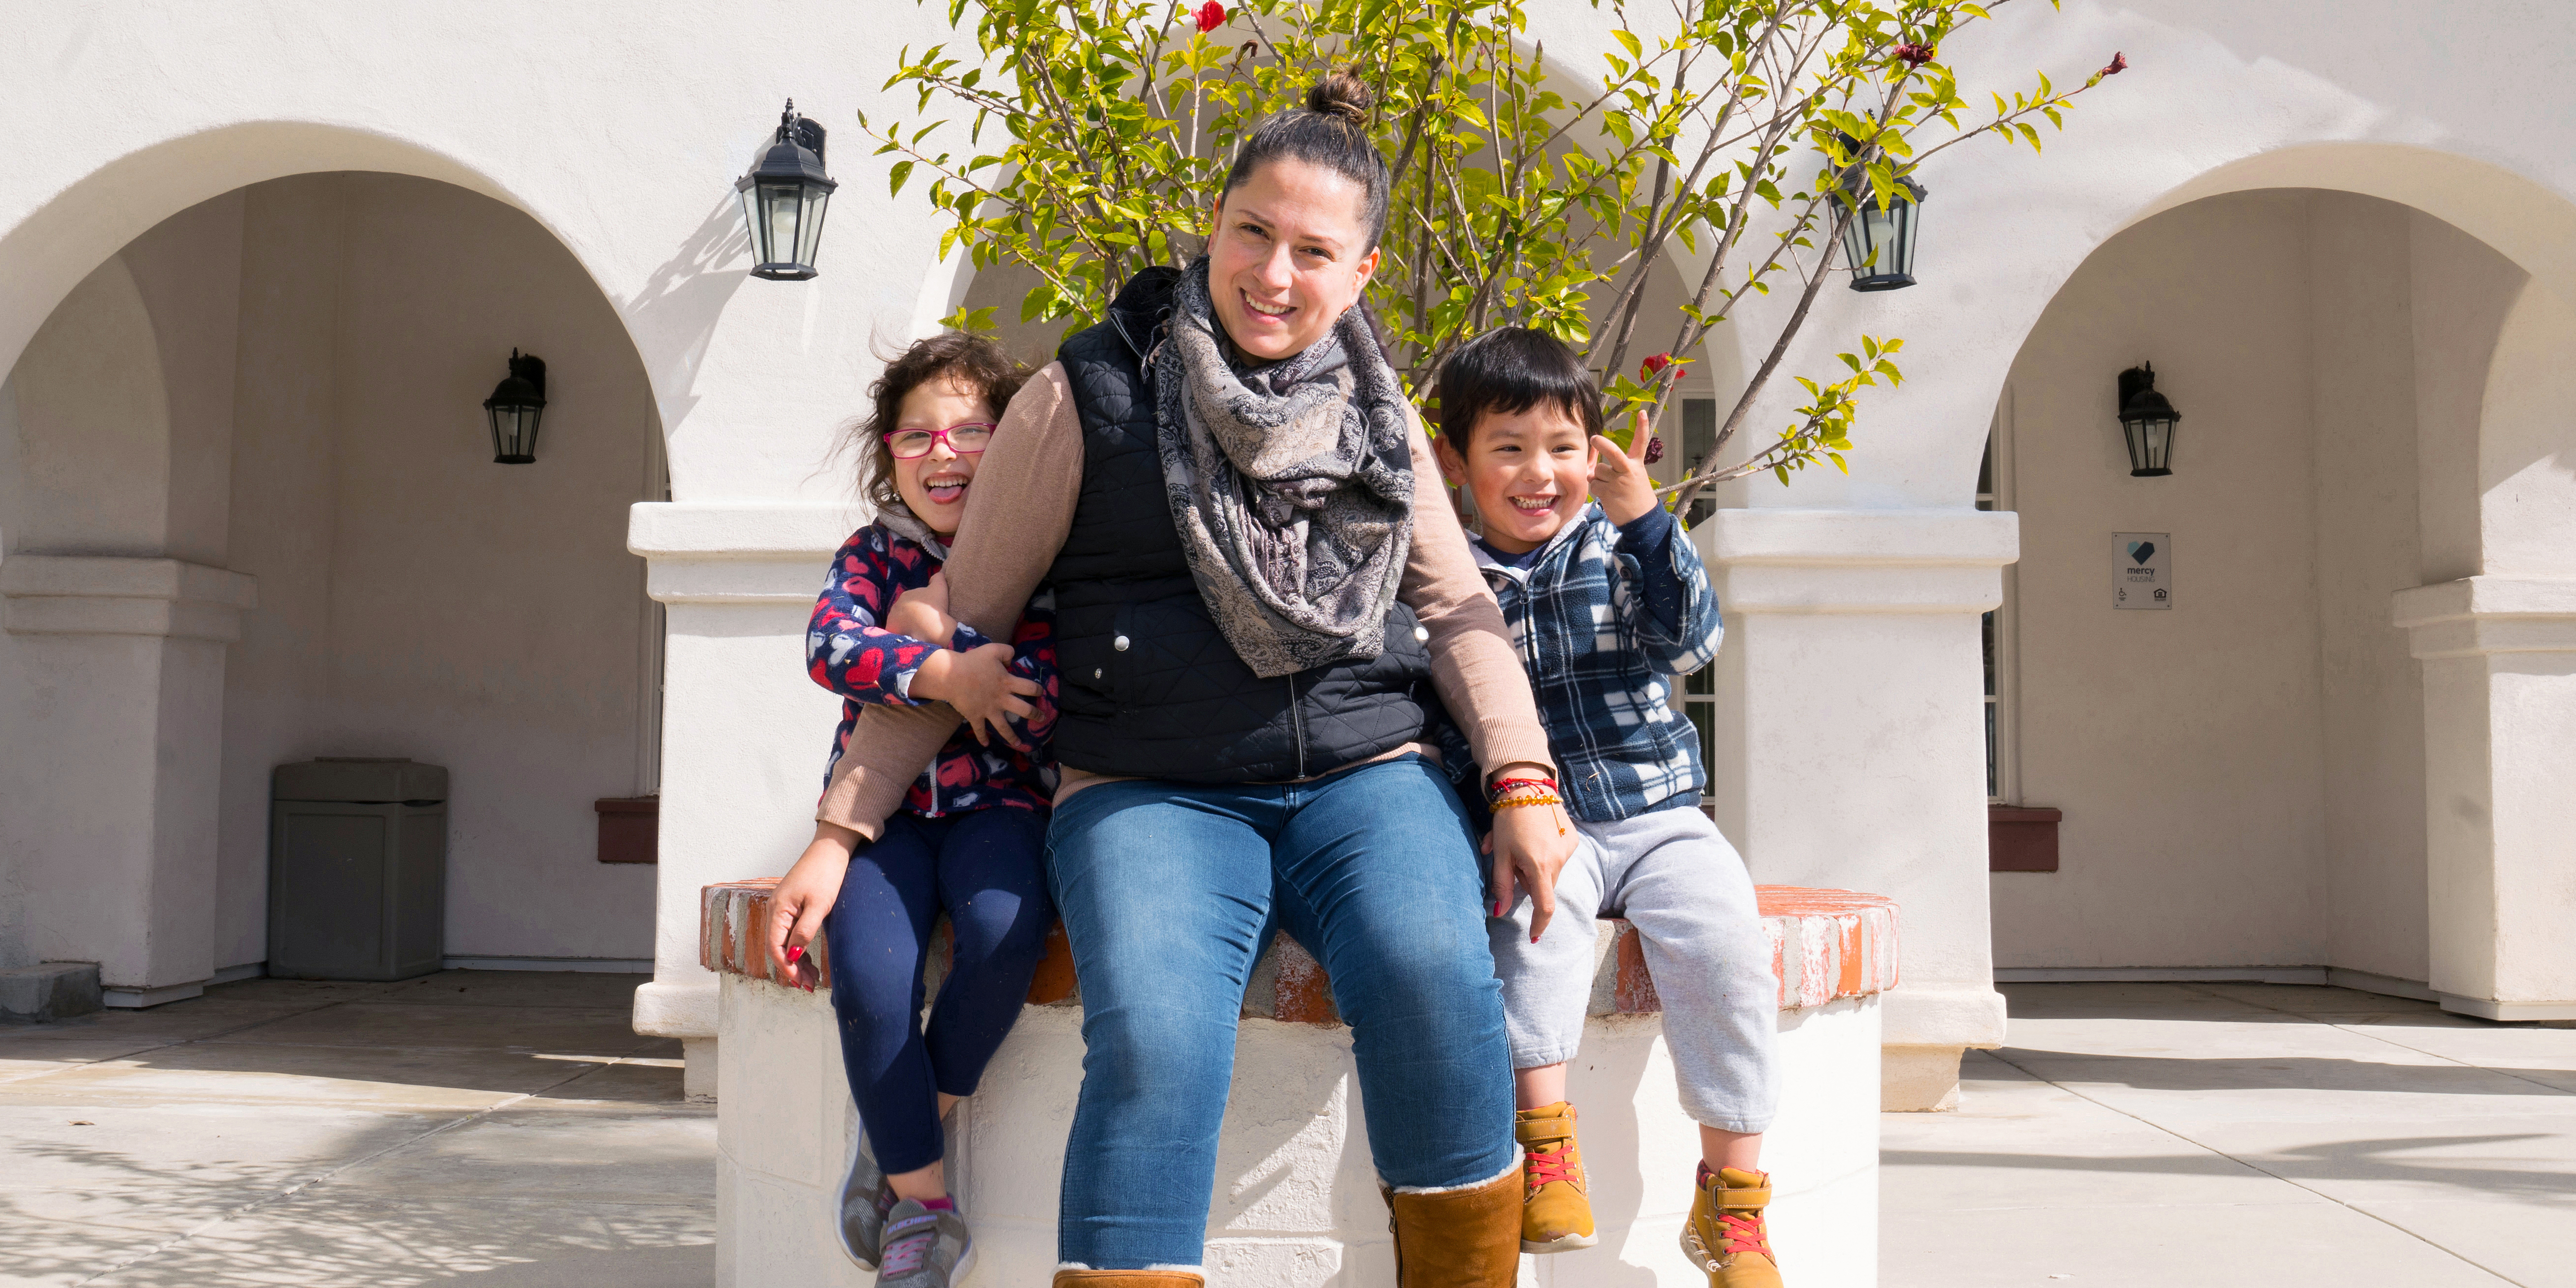 Angela with her two children sit outside of Casa San Juan